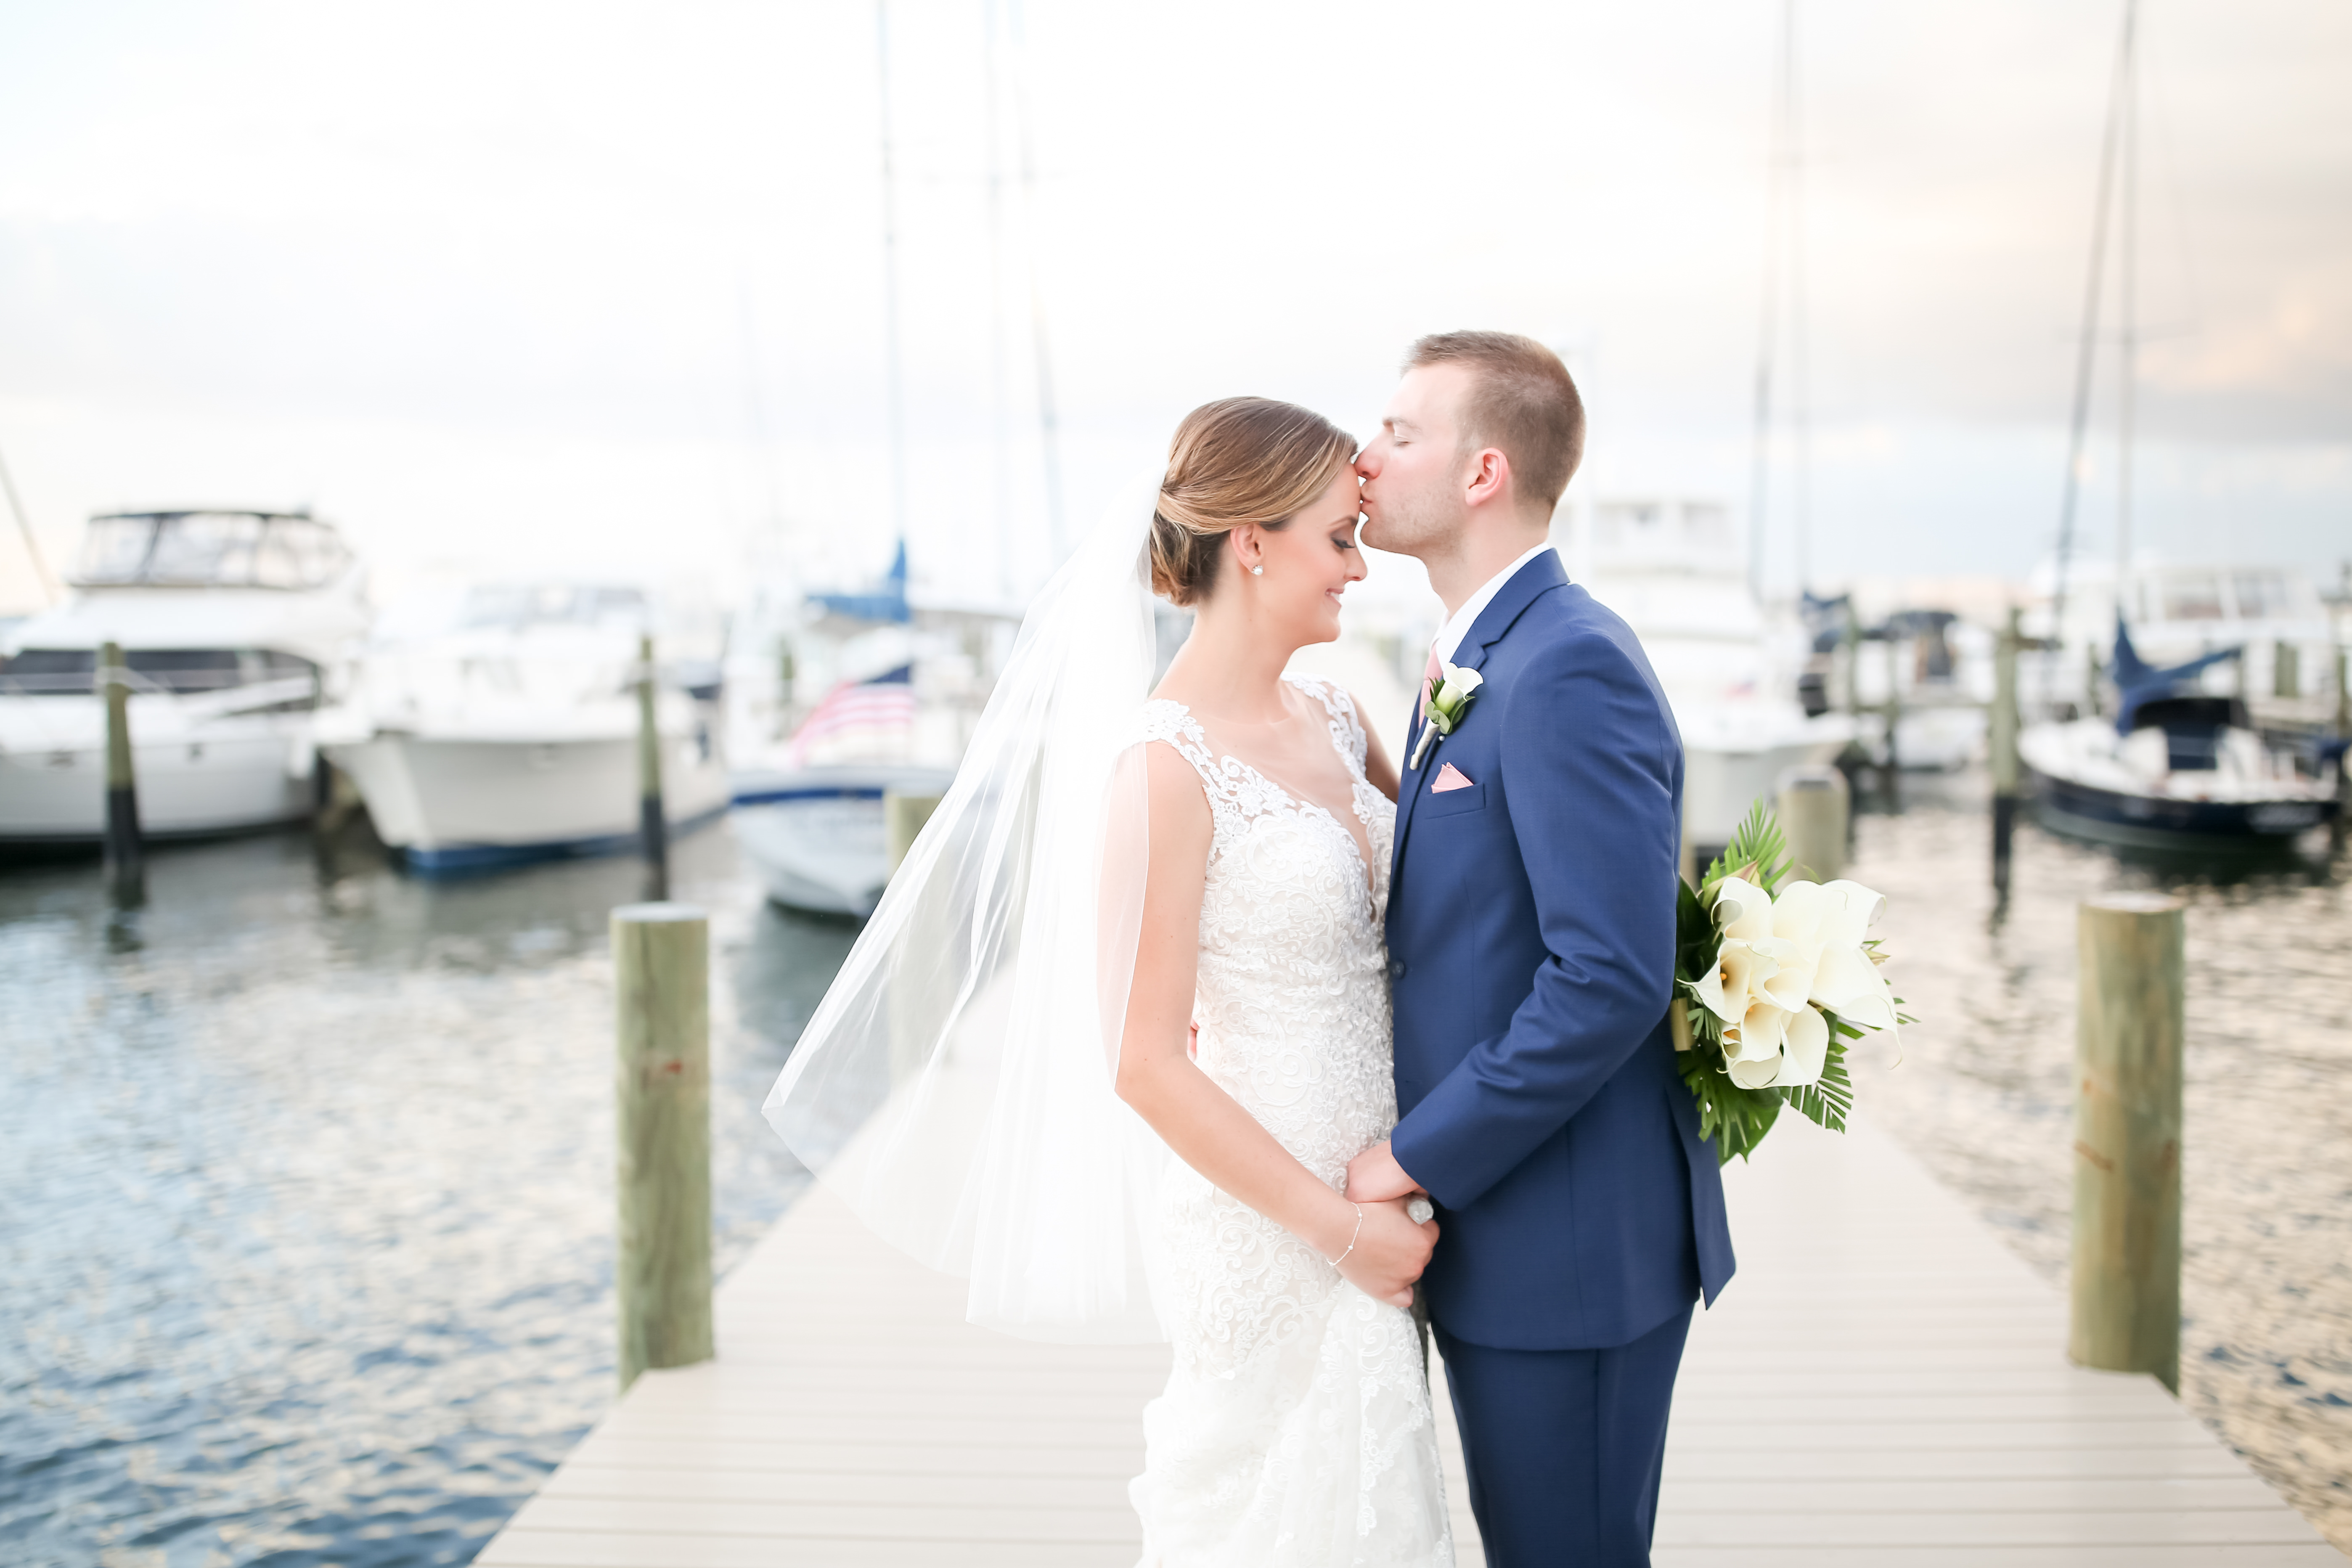 Florida Bride and Groom Sunset Waterfront Yacht Pier Wedding Portrait | Photographer LifeLong Photography Studios | St. Pete Beach Wedding Venue Isla Del Sol Yacht and Country Club | Hair and Makeup Michele Renee The Studio